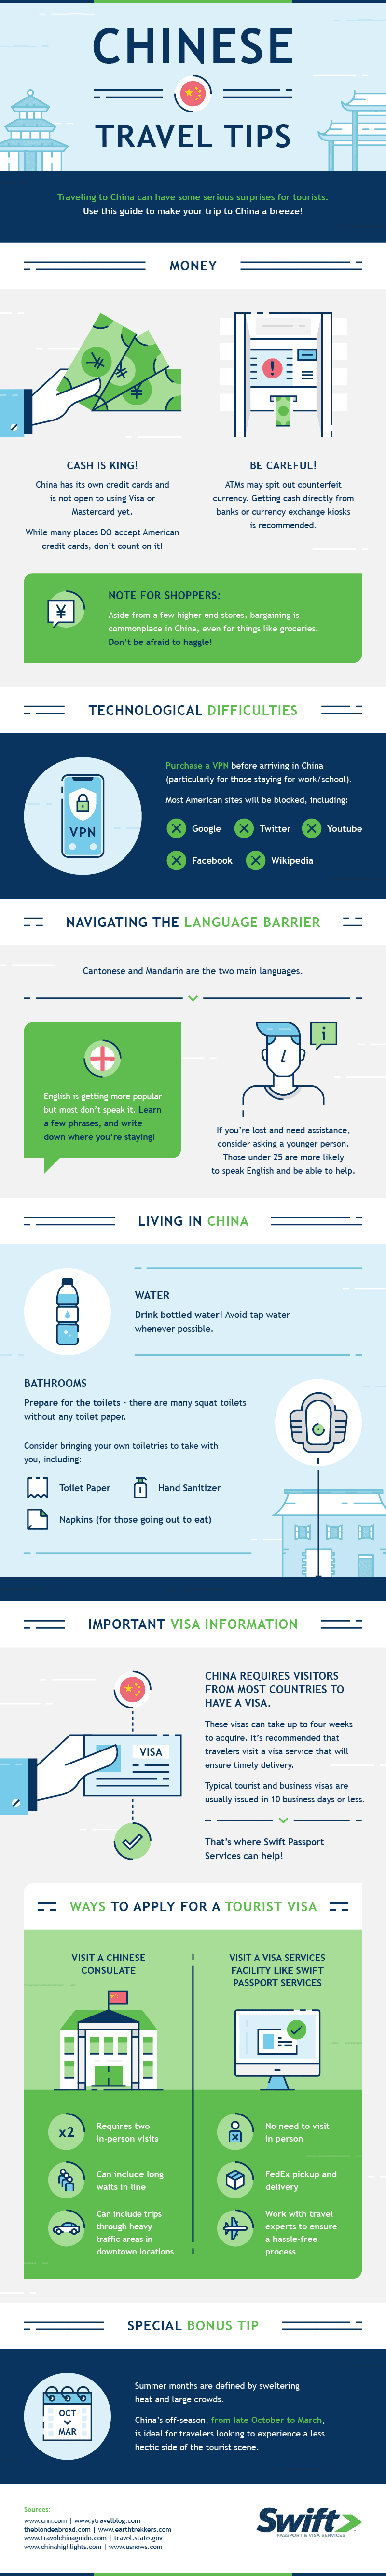 Chinese Travel Tips #infographic